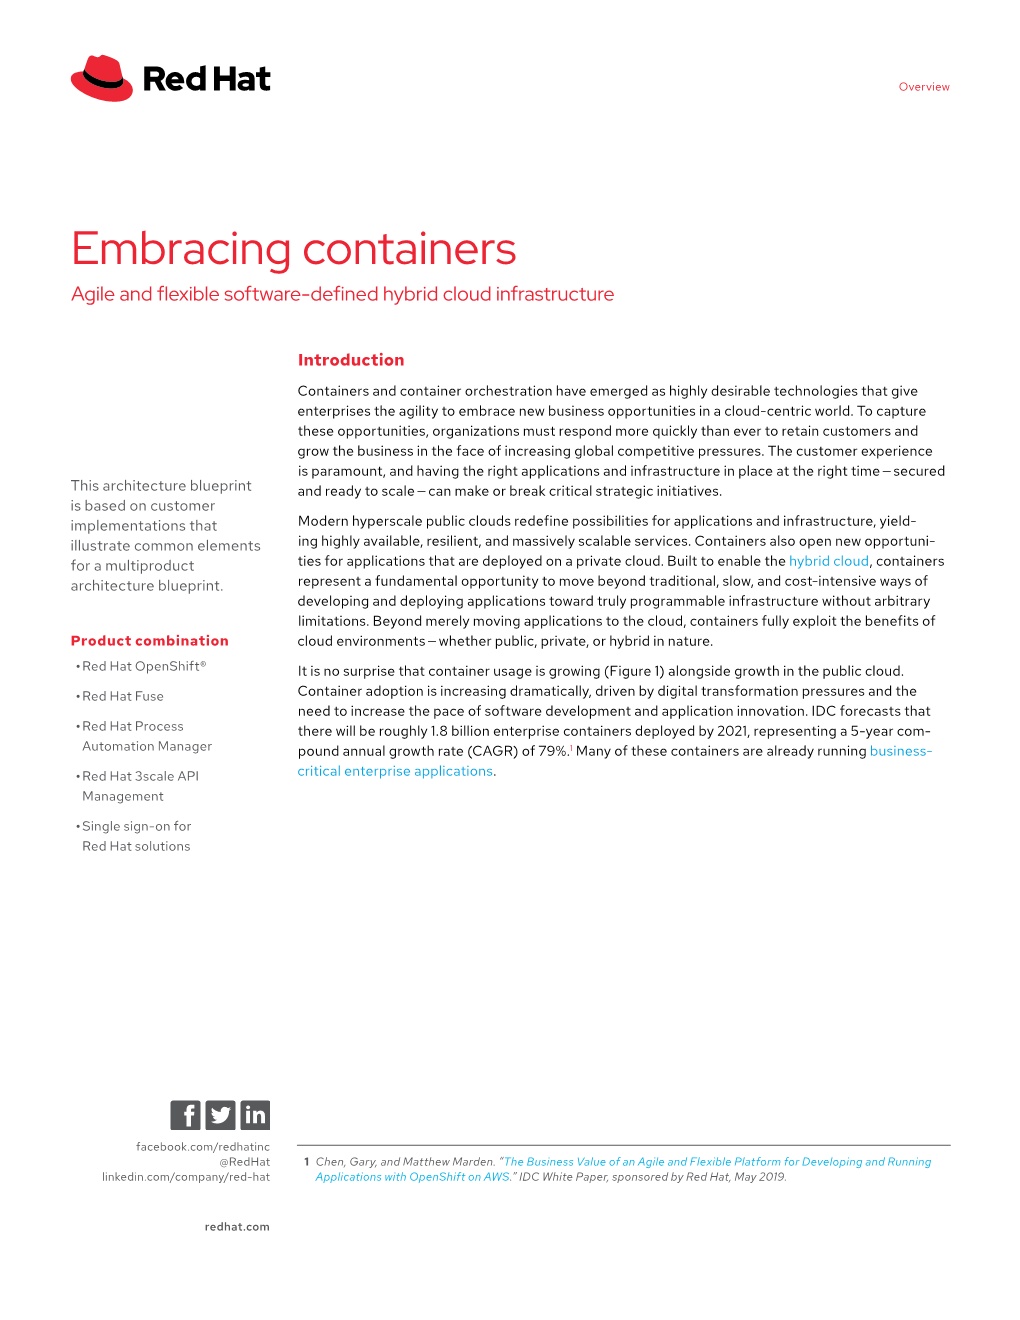 Embracing Containers Agile and Flexible Software-Defined Hybrid Cloud Infrastructure